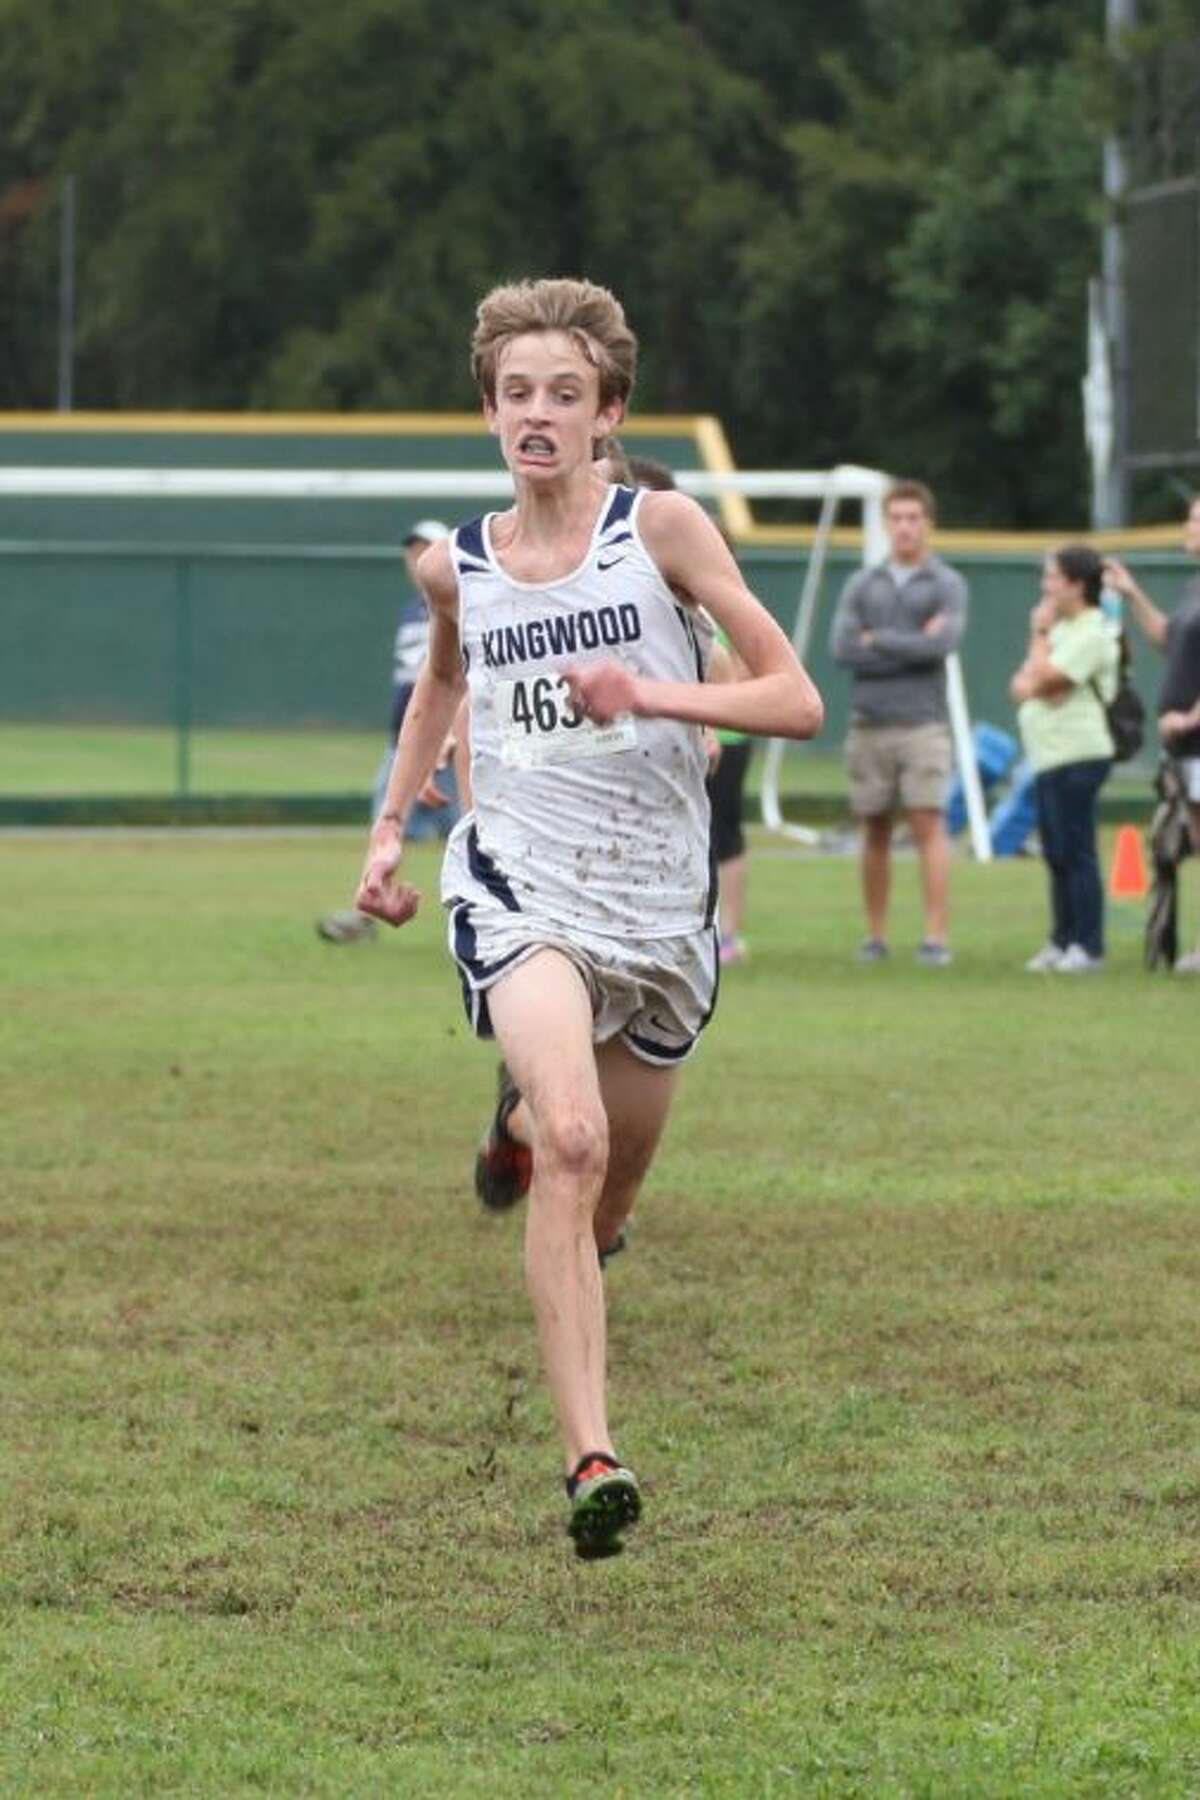 Kingwood junior varsity runner Harry Bellow competes at the Andy Wells Invitational at Kingwood High School on Saturday.